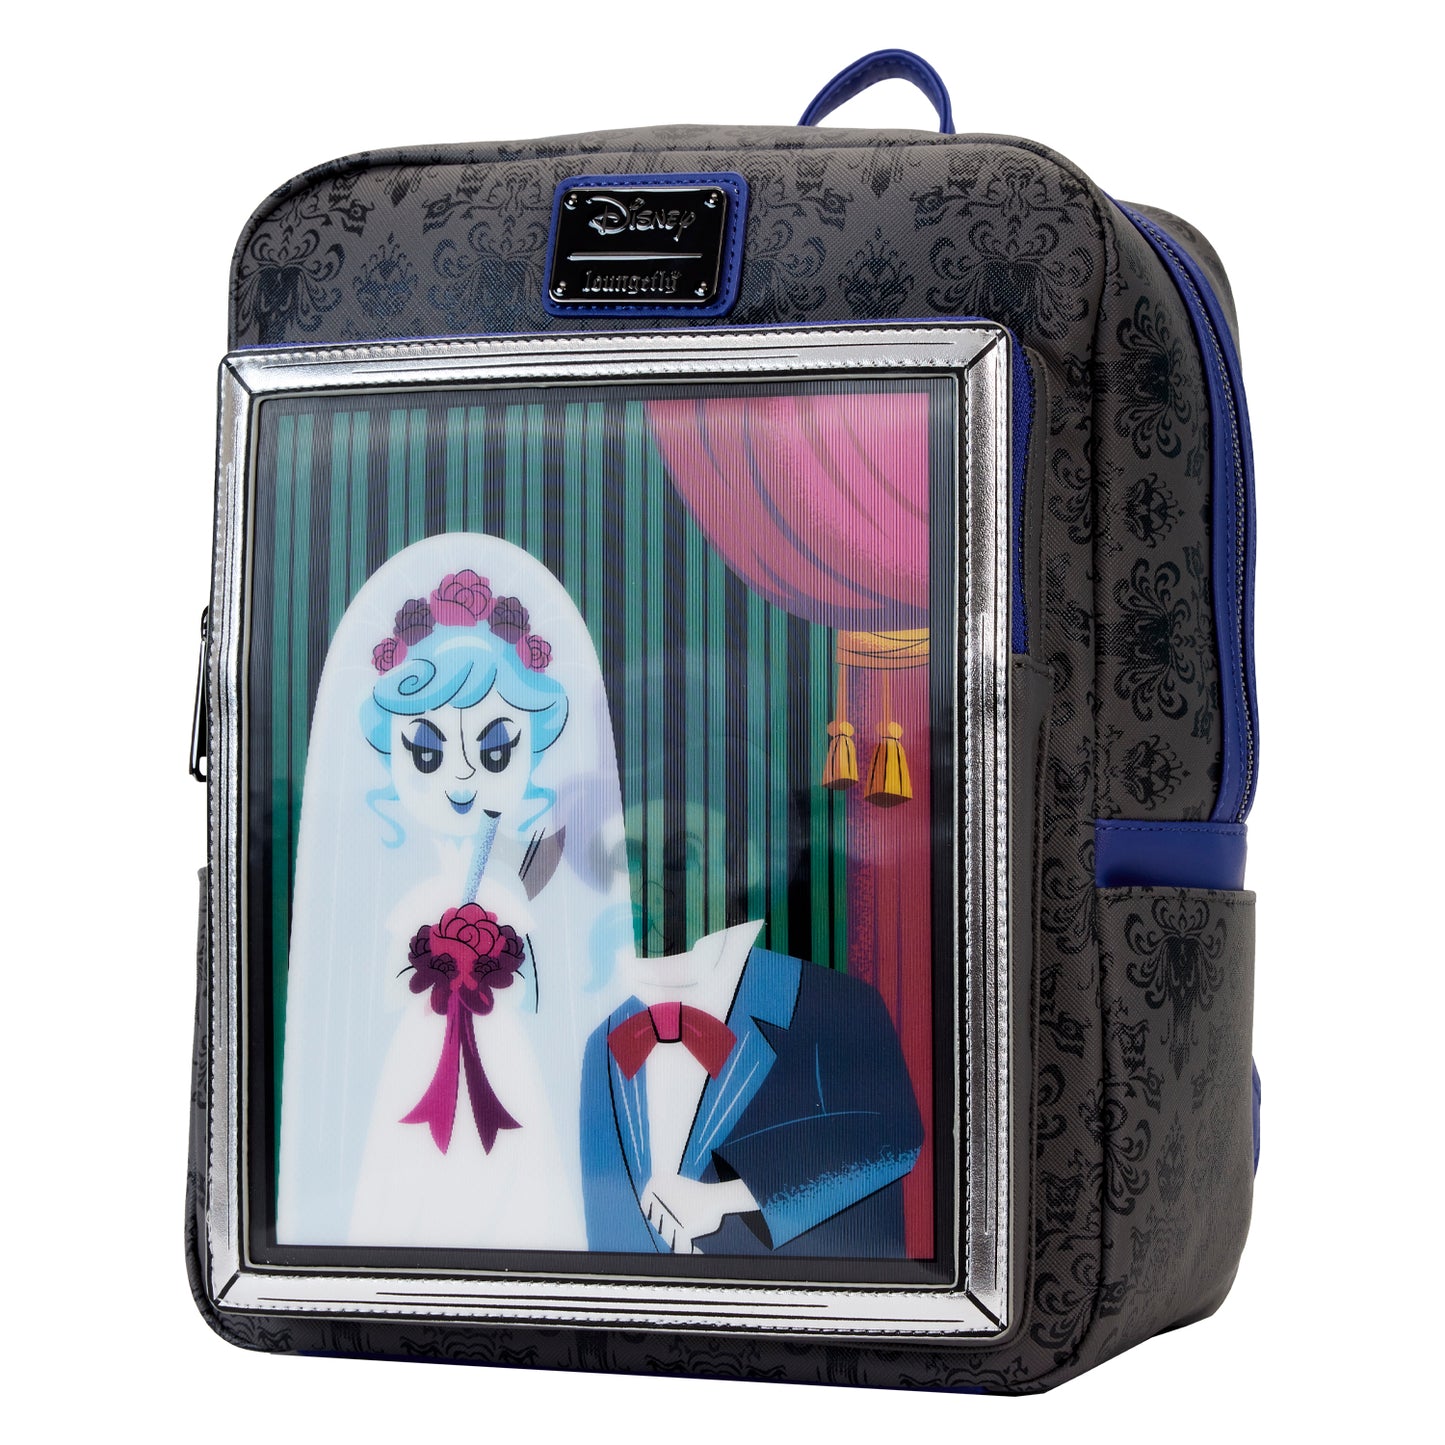 Haunted Mansion The Black Widow Bride Portrait Lenticular Mini Backpack LFY